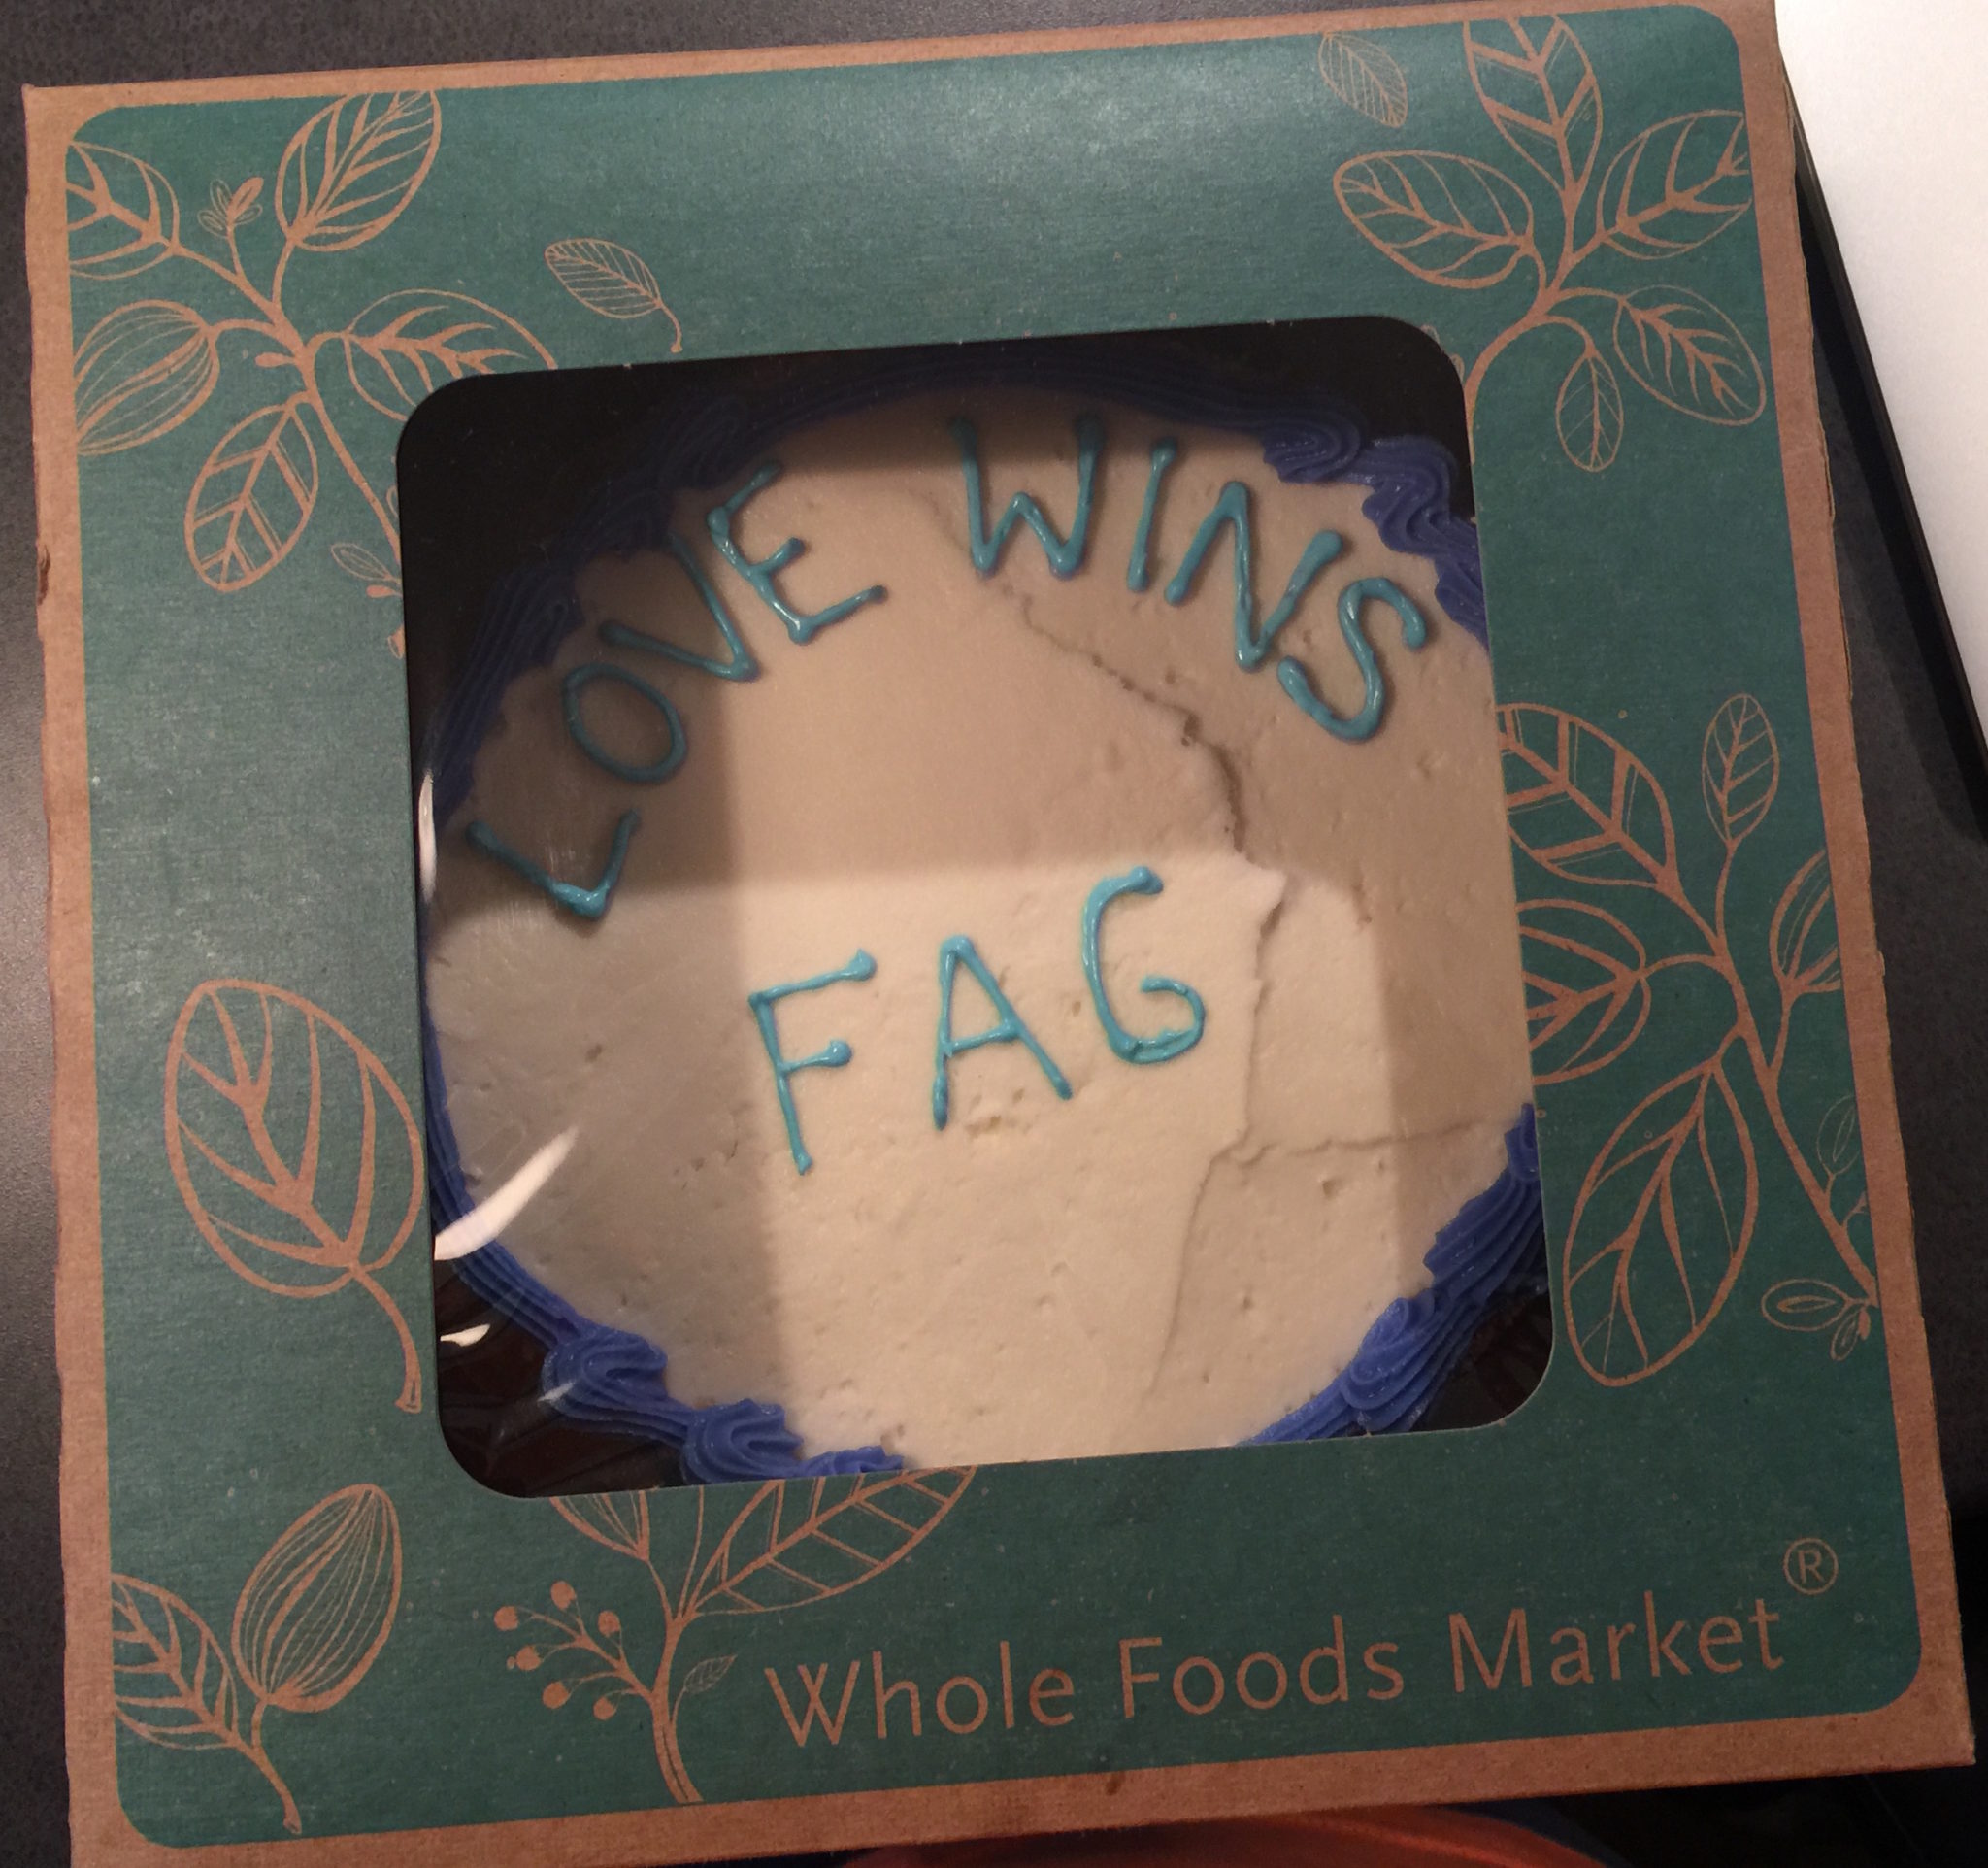 Jordan Brown said he didn't notice the slur on this cake until he was driving home from the Whole Foods flagship store in Austin where he purchased it.